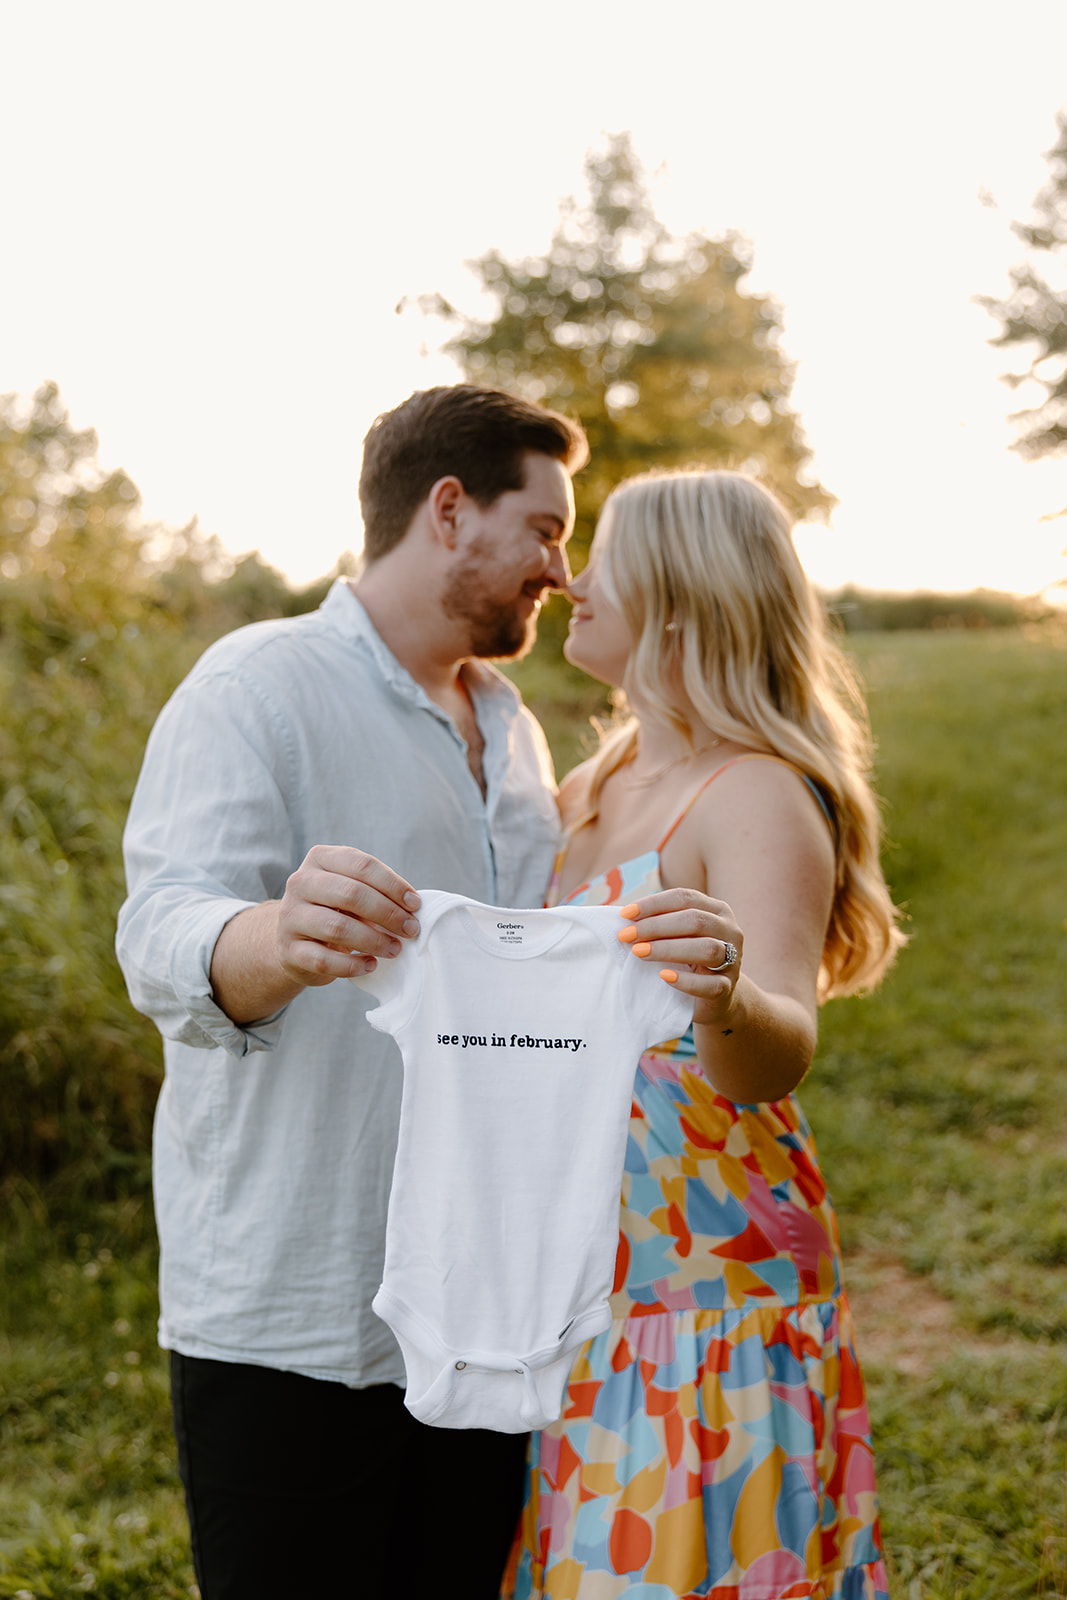 Pregnancy announcement pictures at a field.